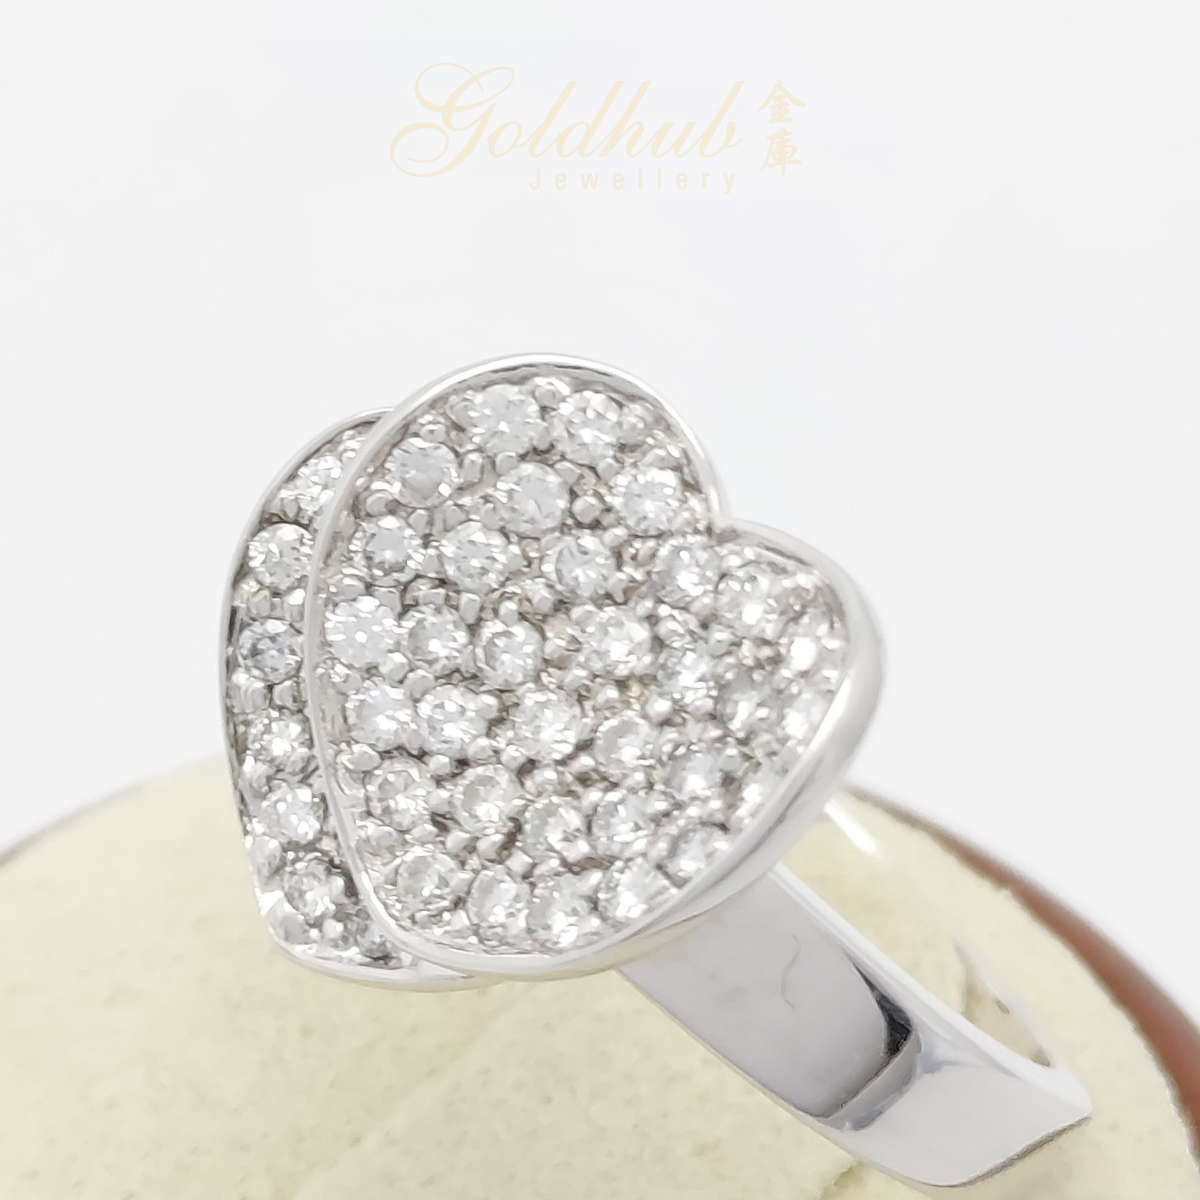 [FURTHER DISCOUNTED] 18k Double Heart Diamond Ring in White Gold